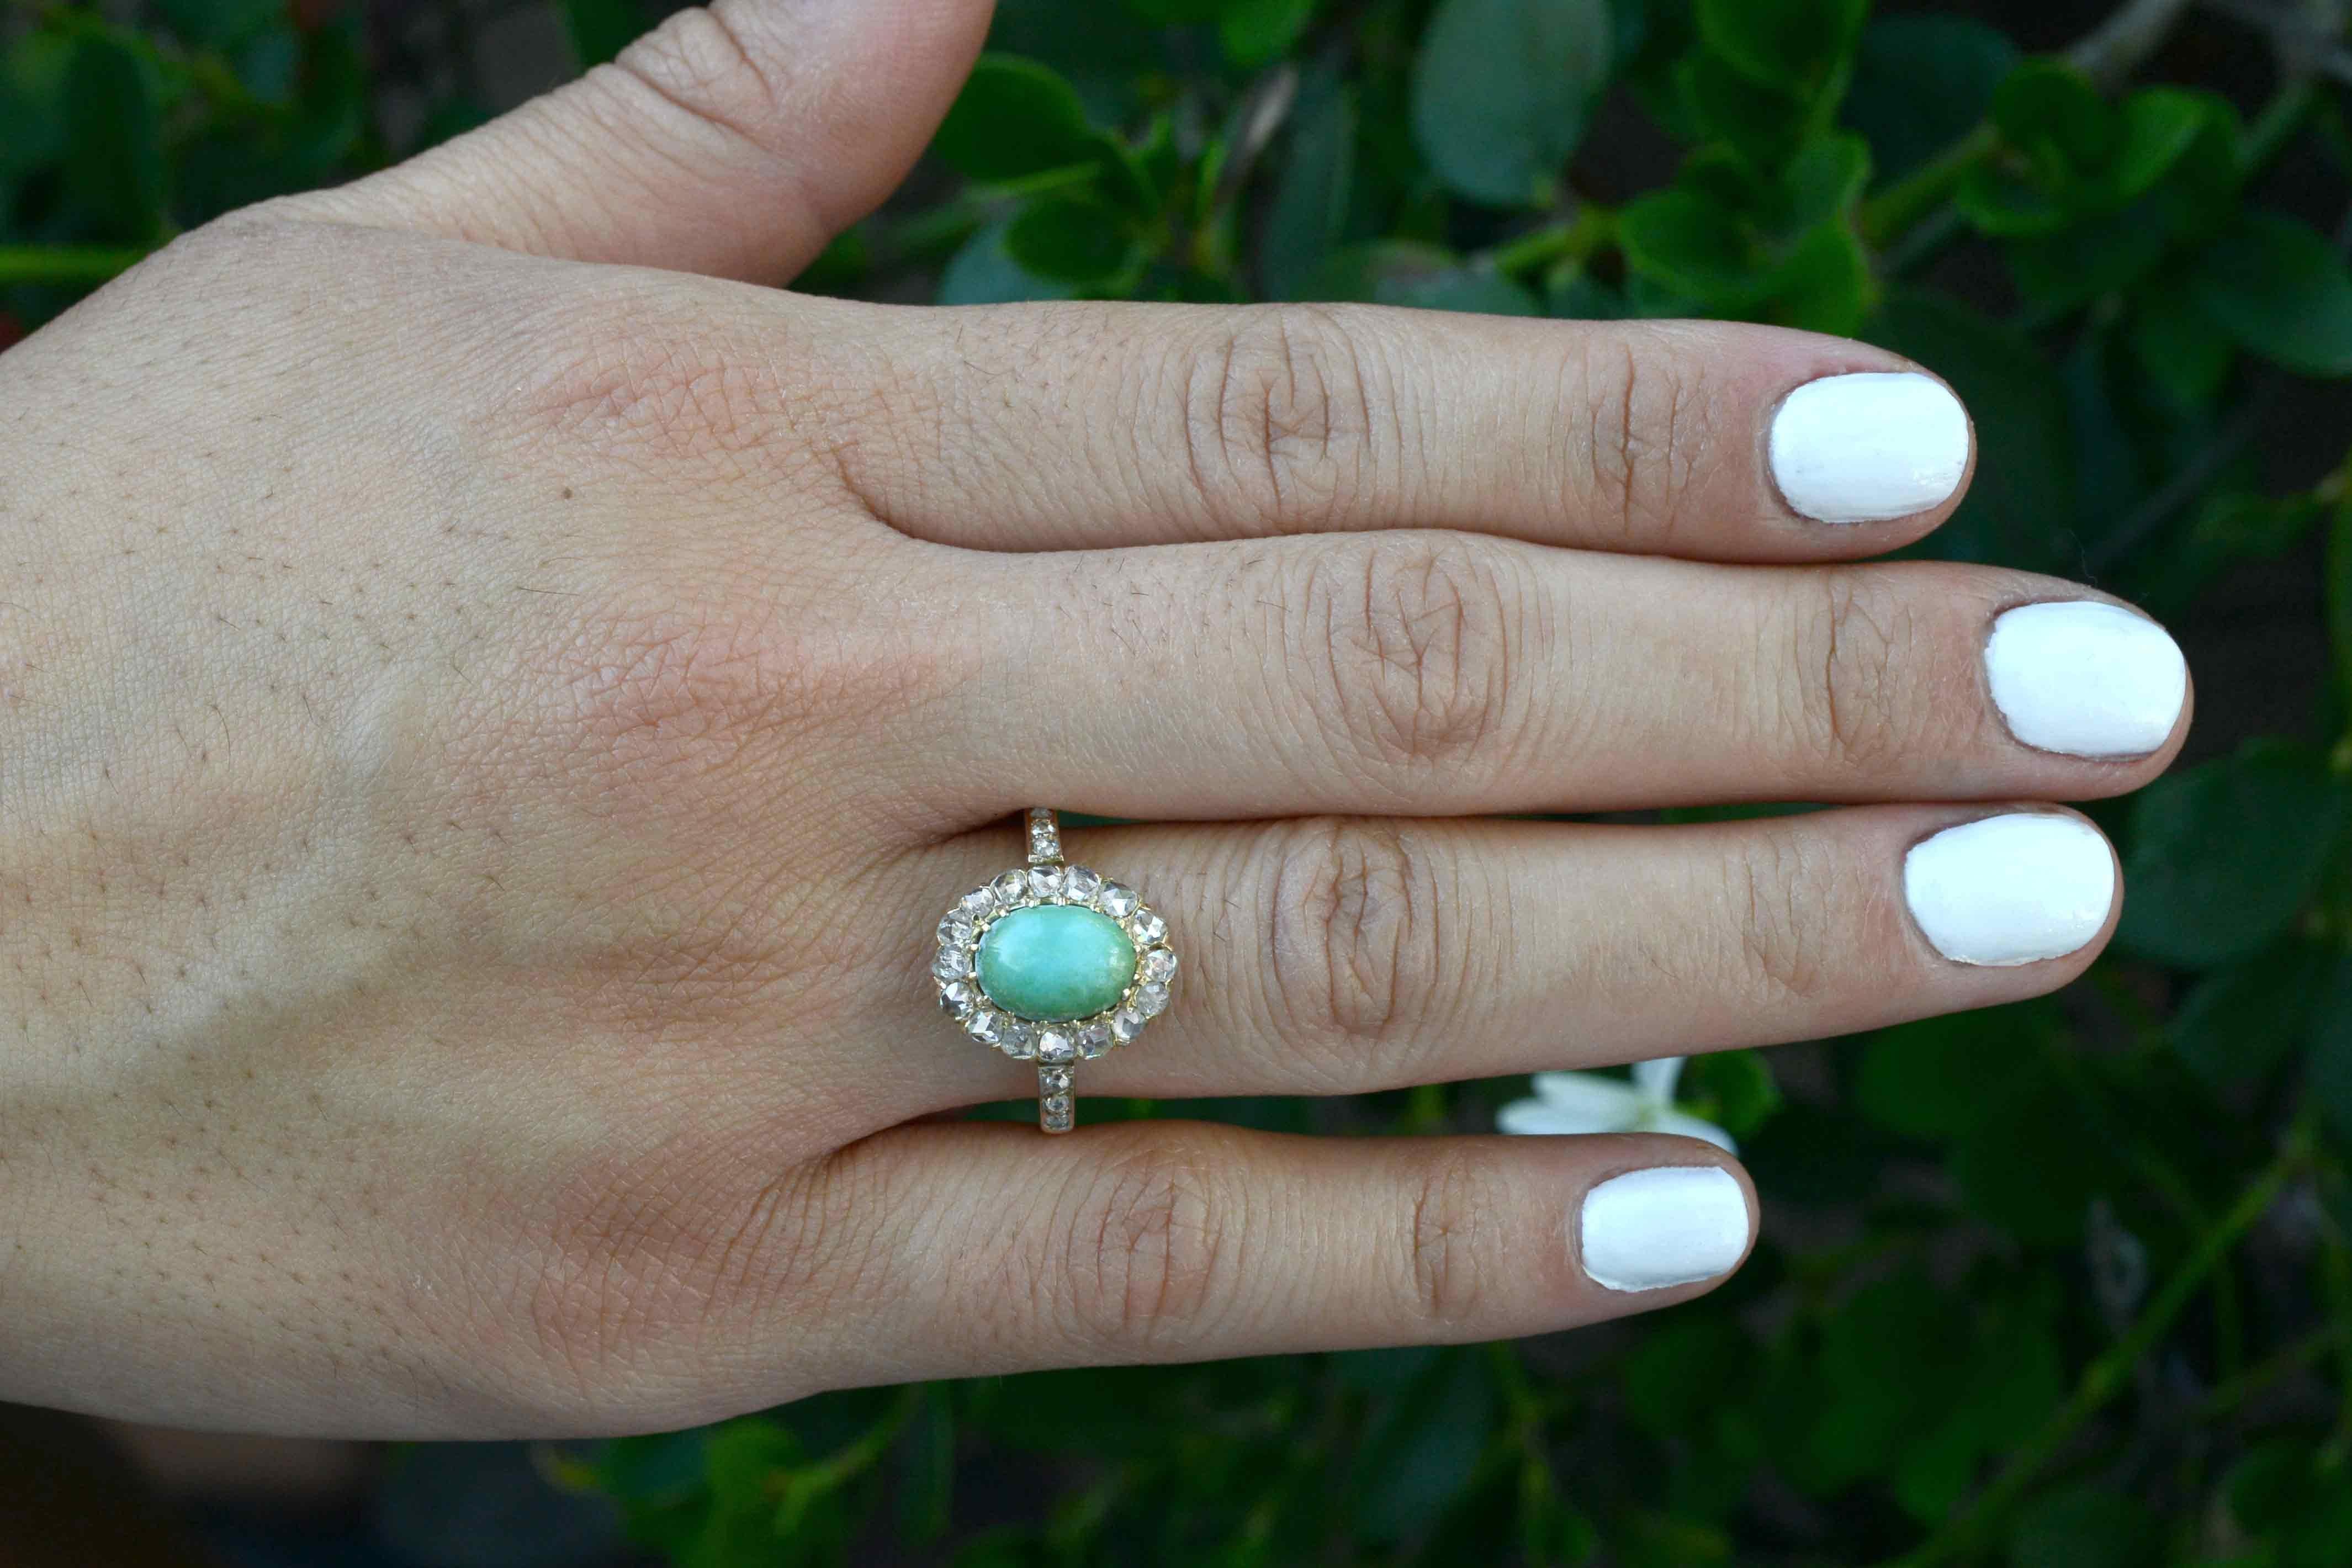 The Santa Rosa Cluster Engagement Ring. Centered by a vibrant robin's egg blue Persian Turquoise and surrounded by a twinkling halo of rose cut diamonds, this original, antique stunner from the Art Nouveau era is fabulous wardrobe essential. You